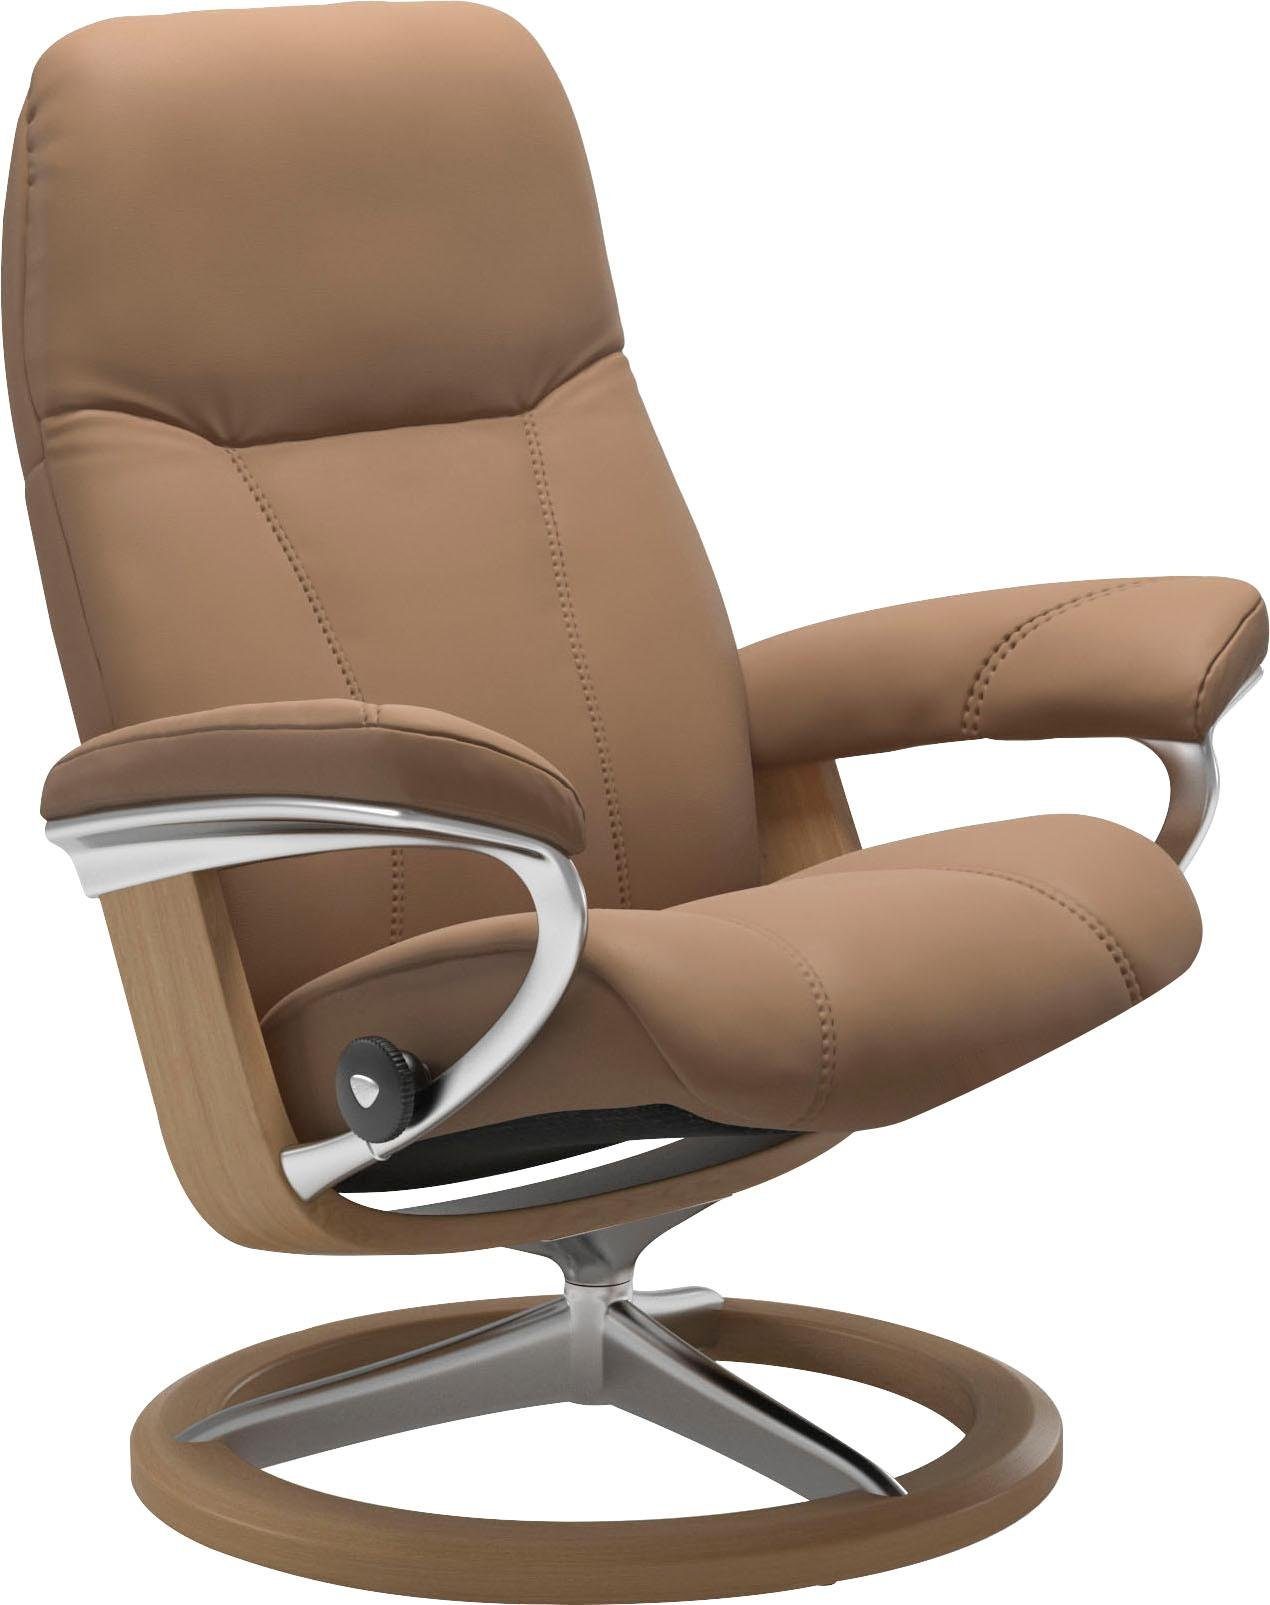 Stressless® Relaxsessel Consul, mit Signature Base, Größe L, Gestell Eiche | Funktionssessel